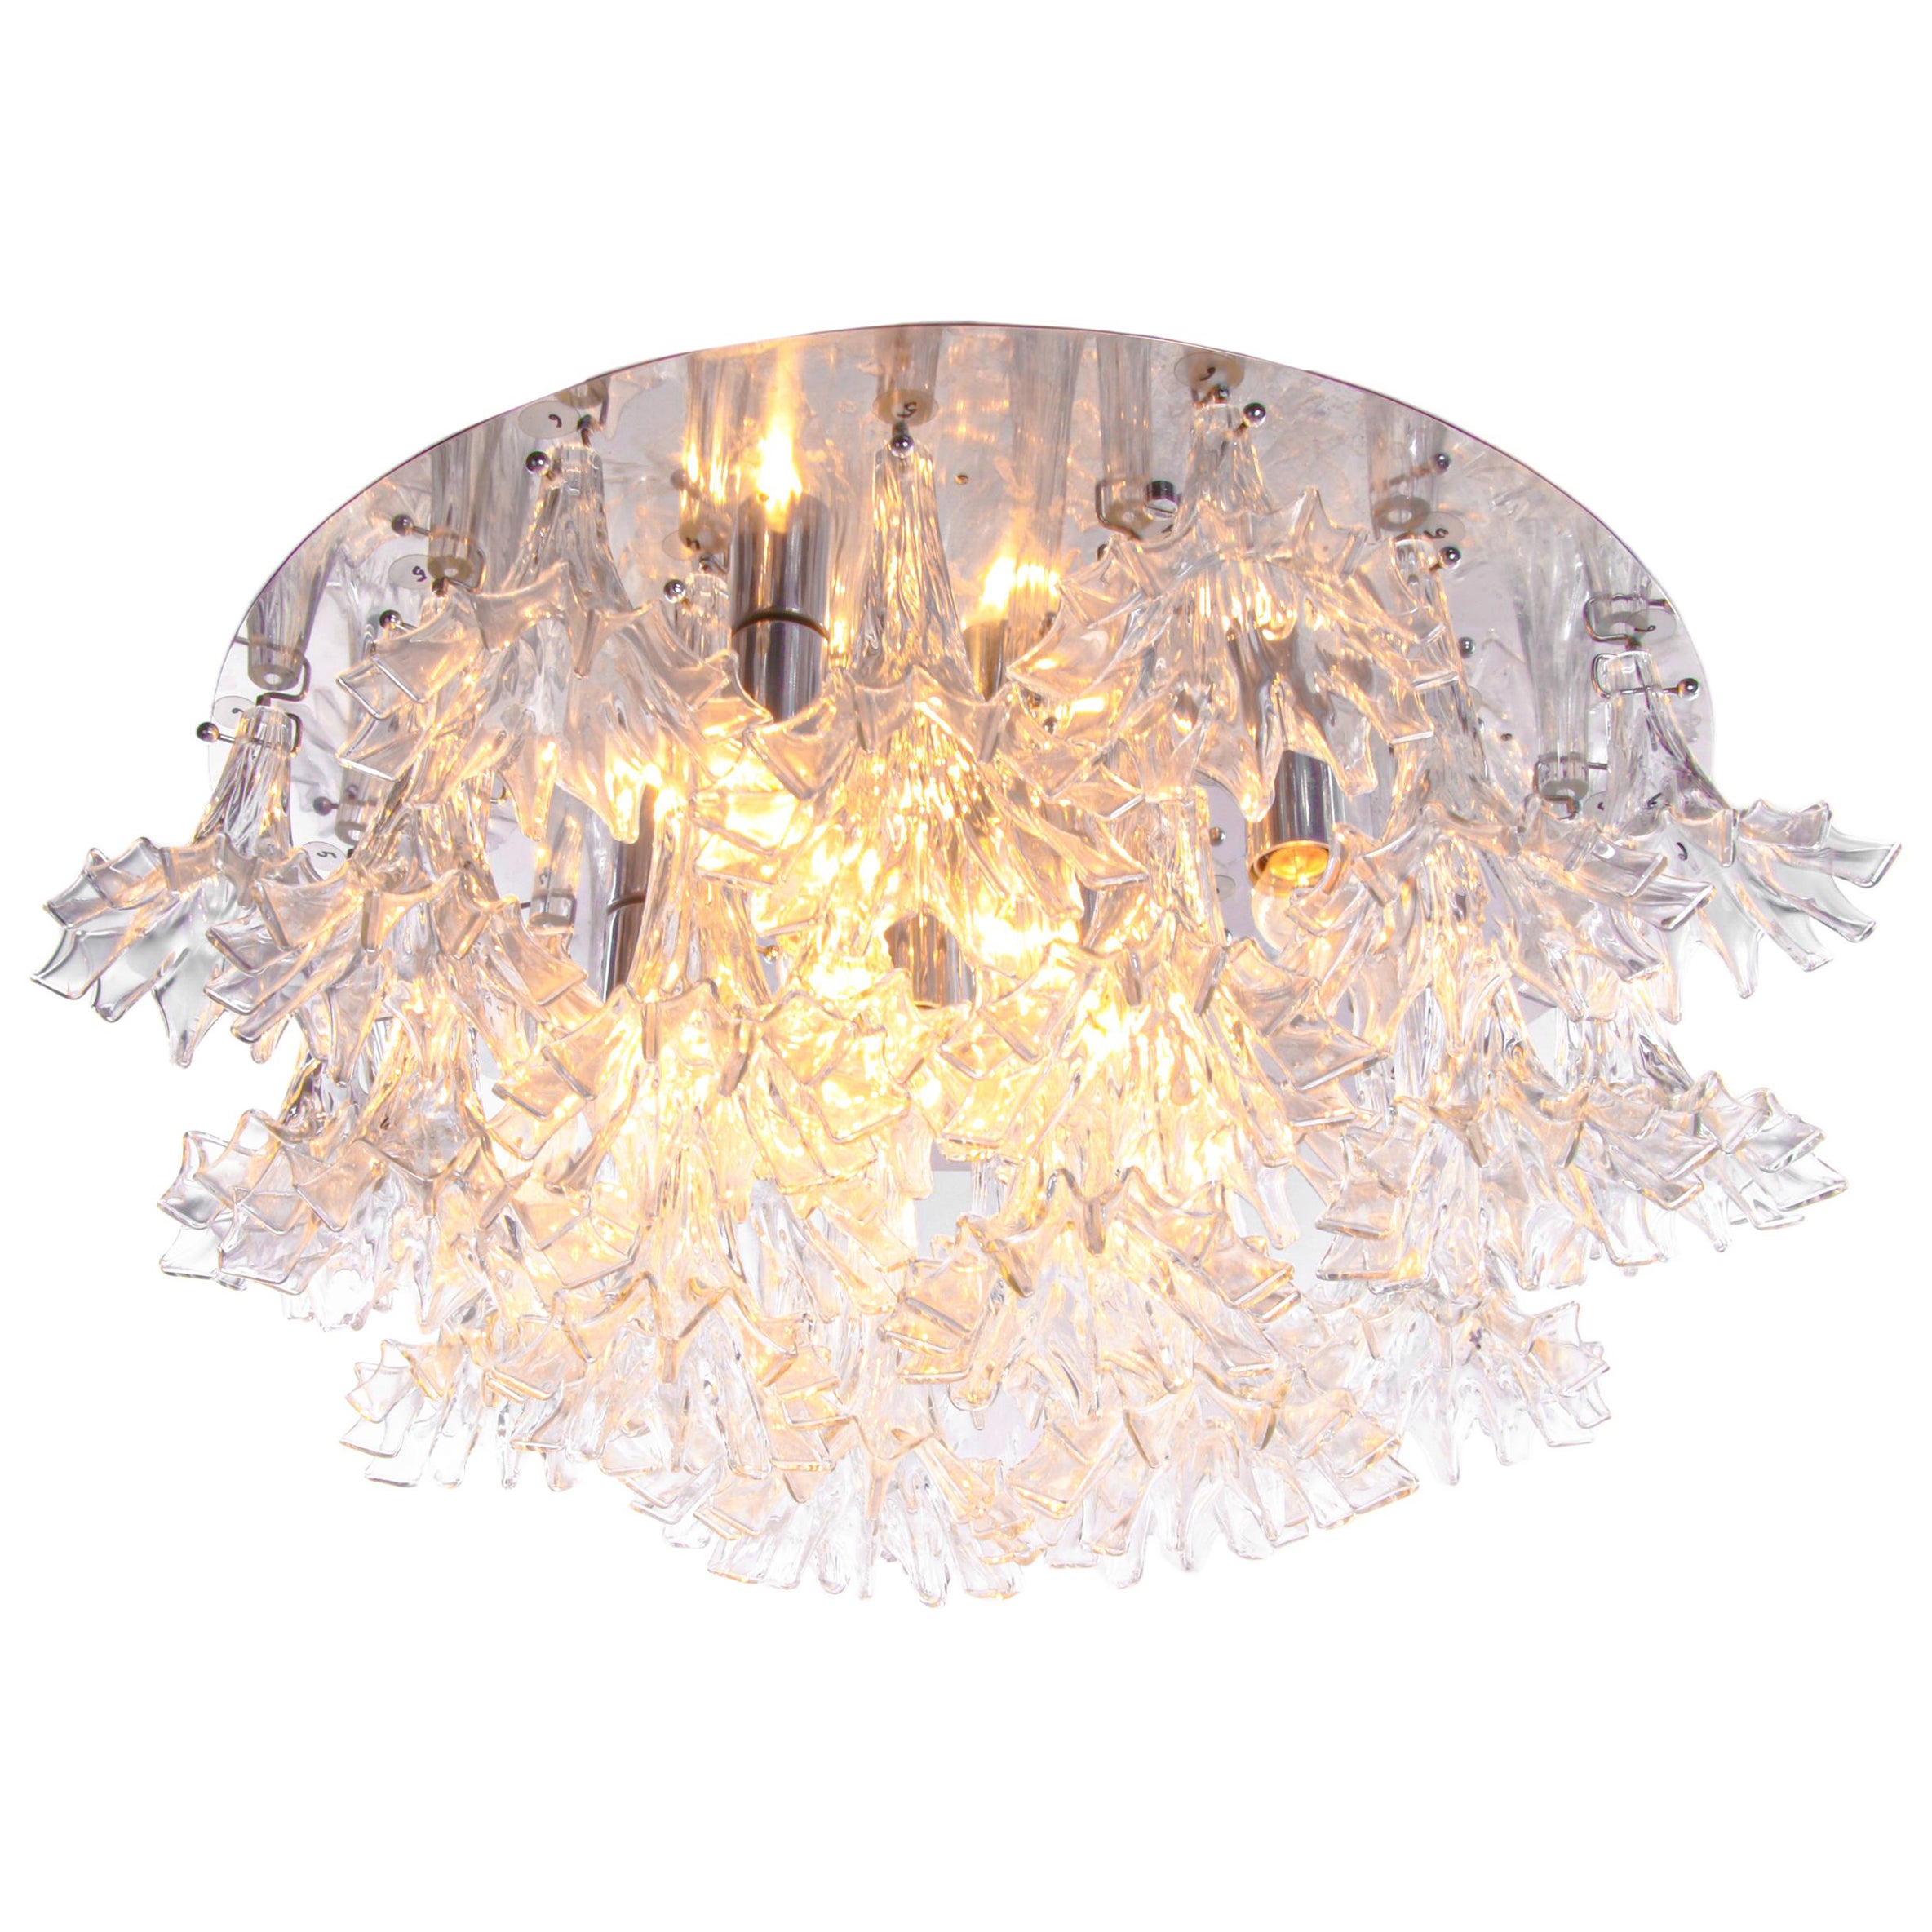 1 'of 2' Arethusa Murano 34" Flush Mount Chandelier by Barovier & Toso, 1960s For Sale